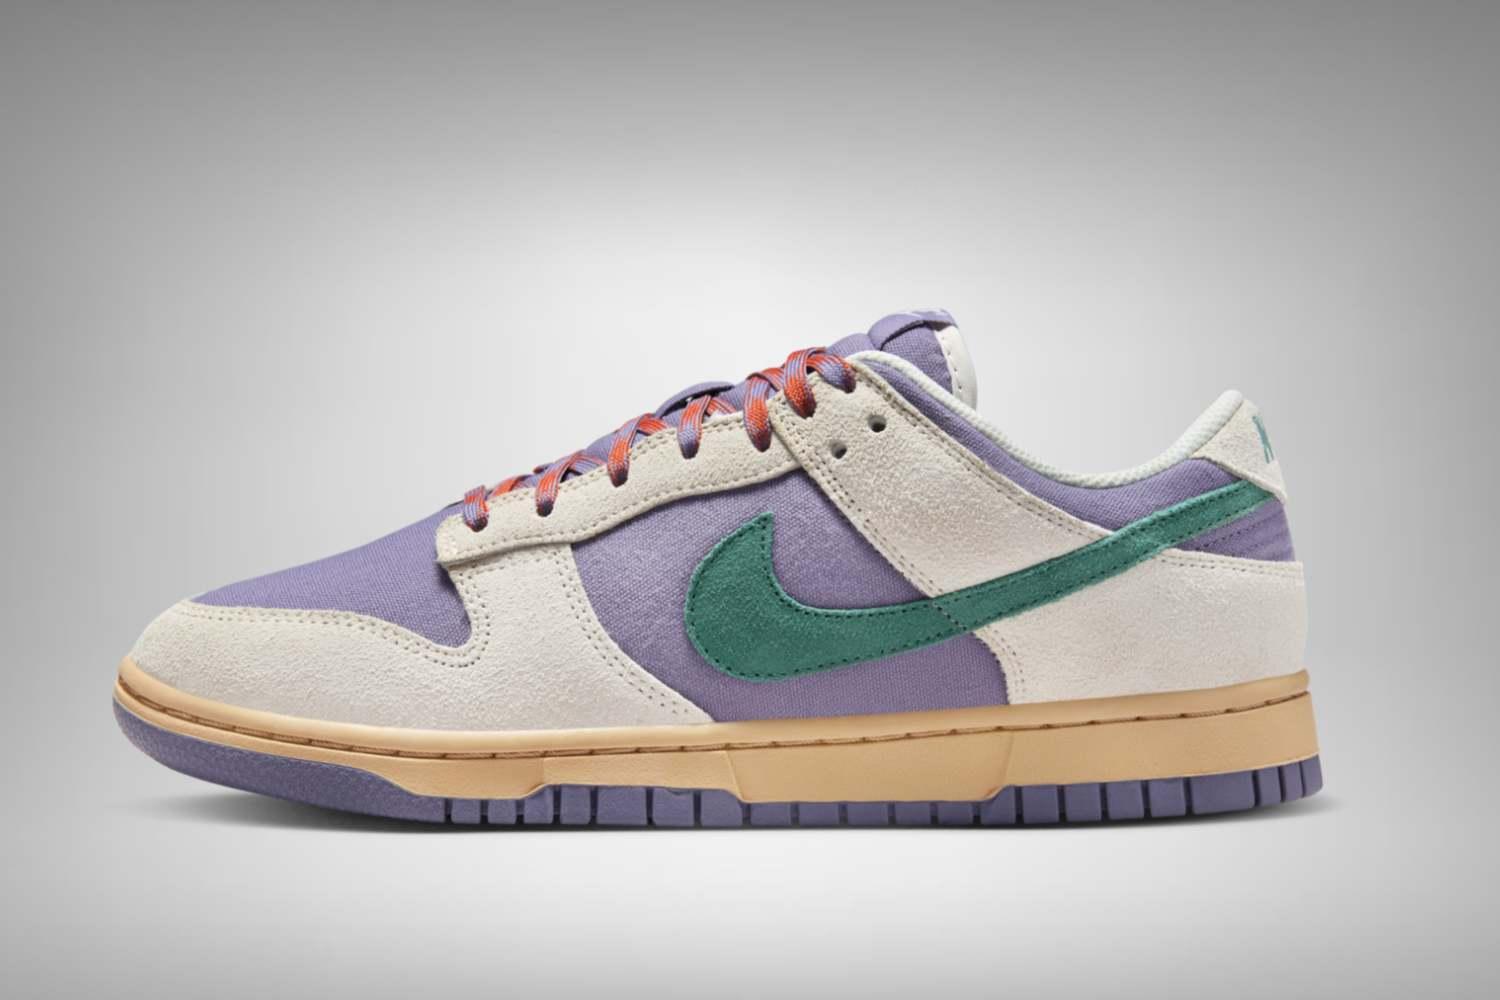 The Nike Dunk Low gets a Joker makeover